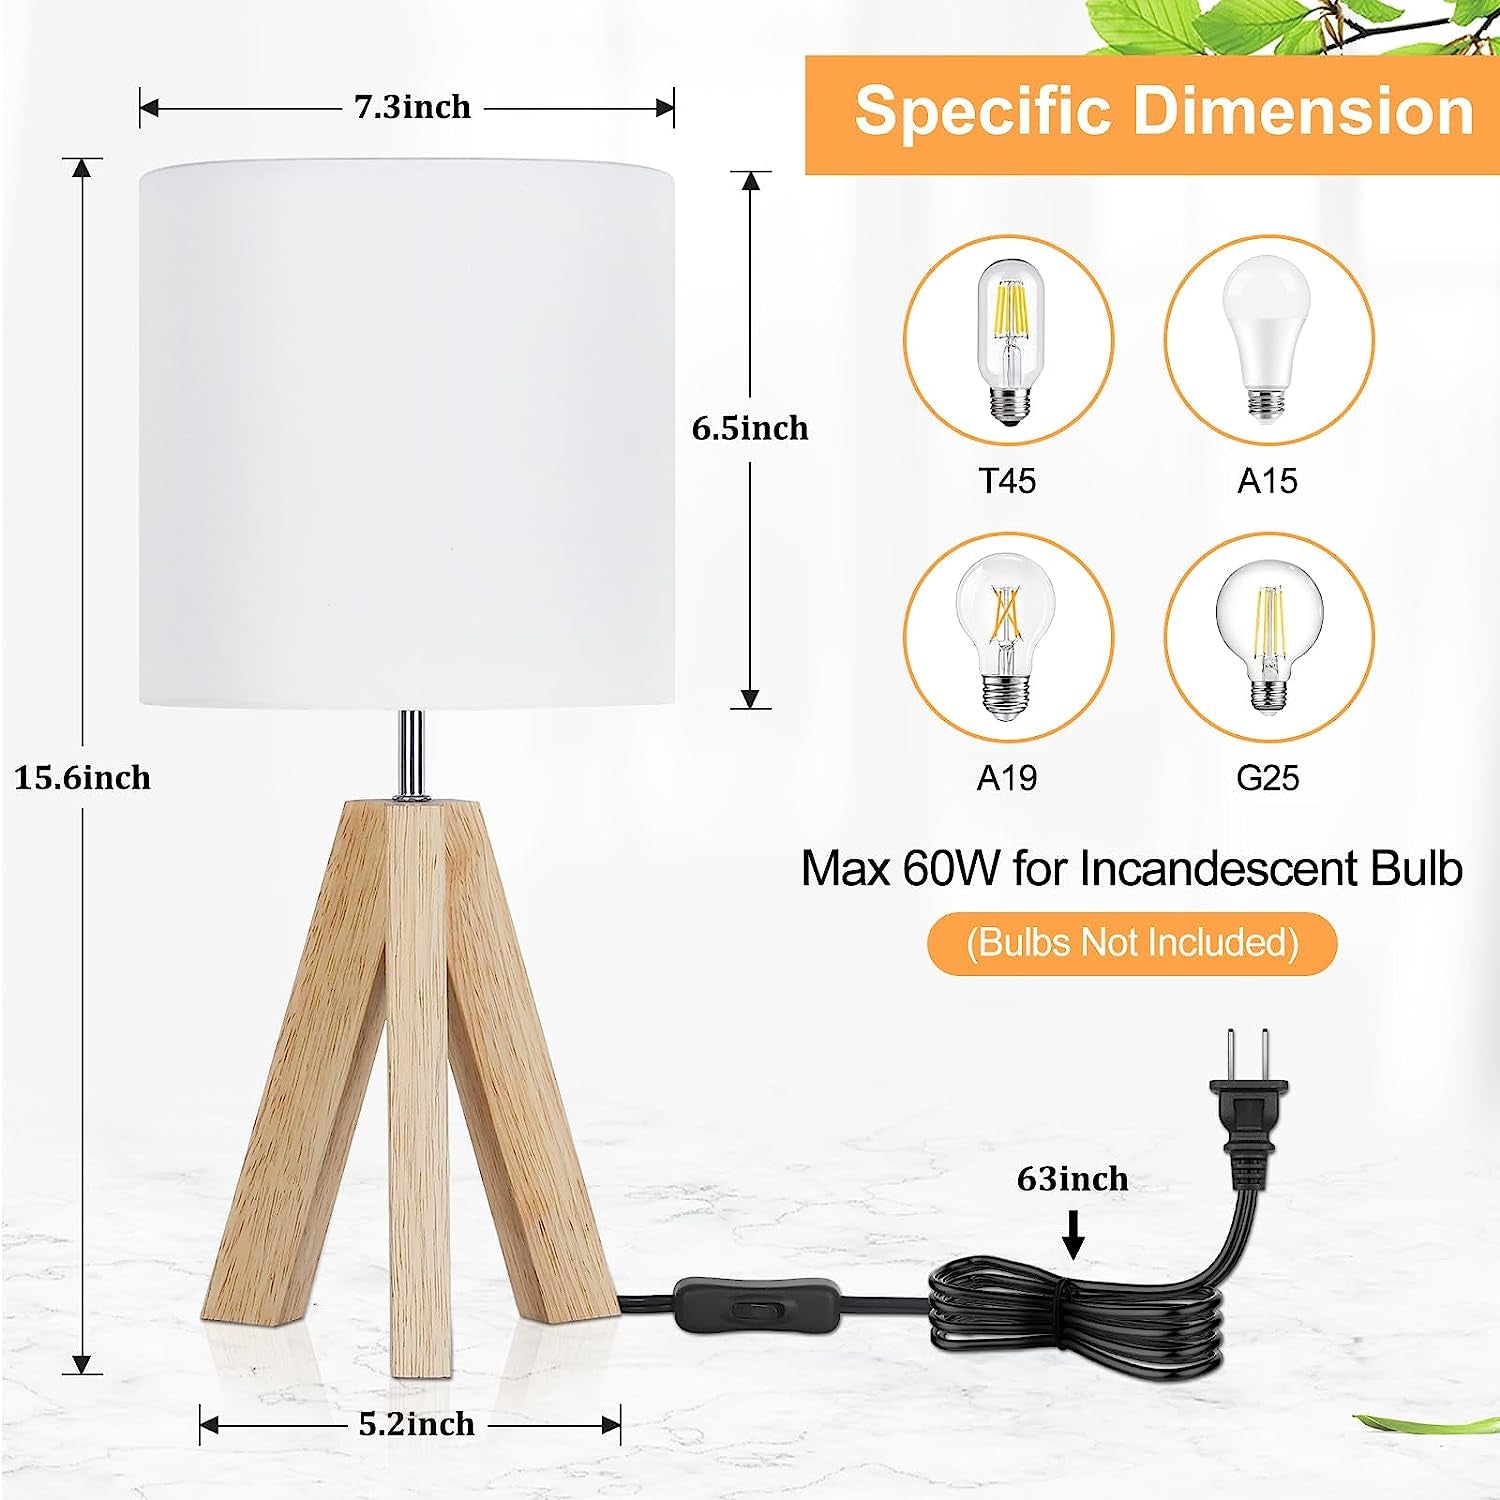 Small Table Lamp, Wood Tripod Table Lamp with White Fabric Shade Bulb Not Included